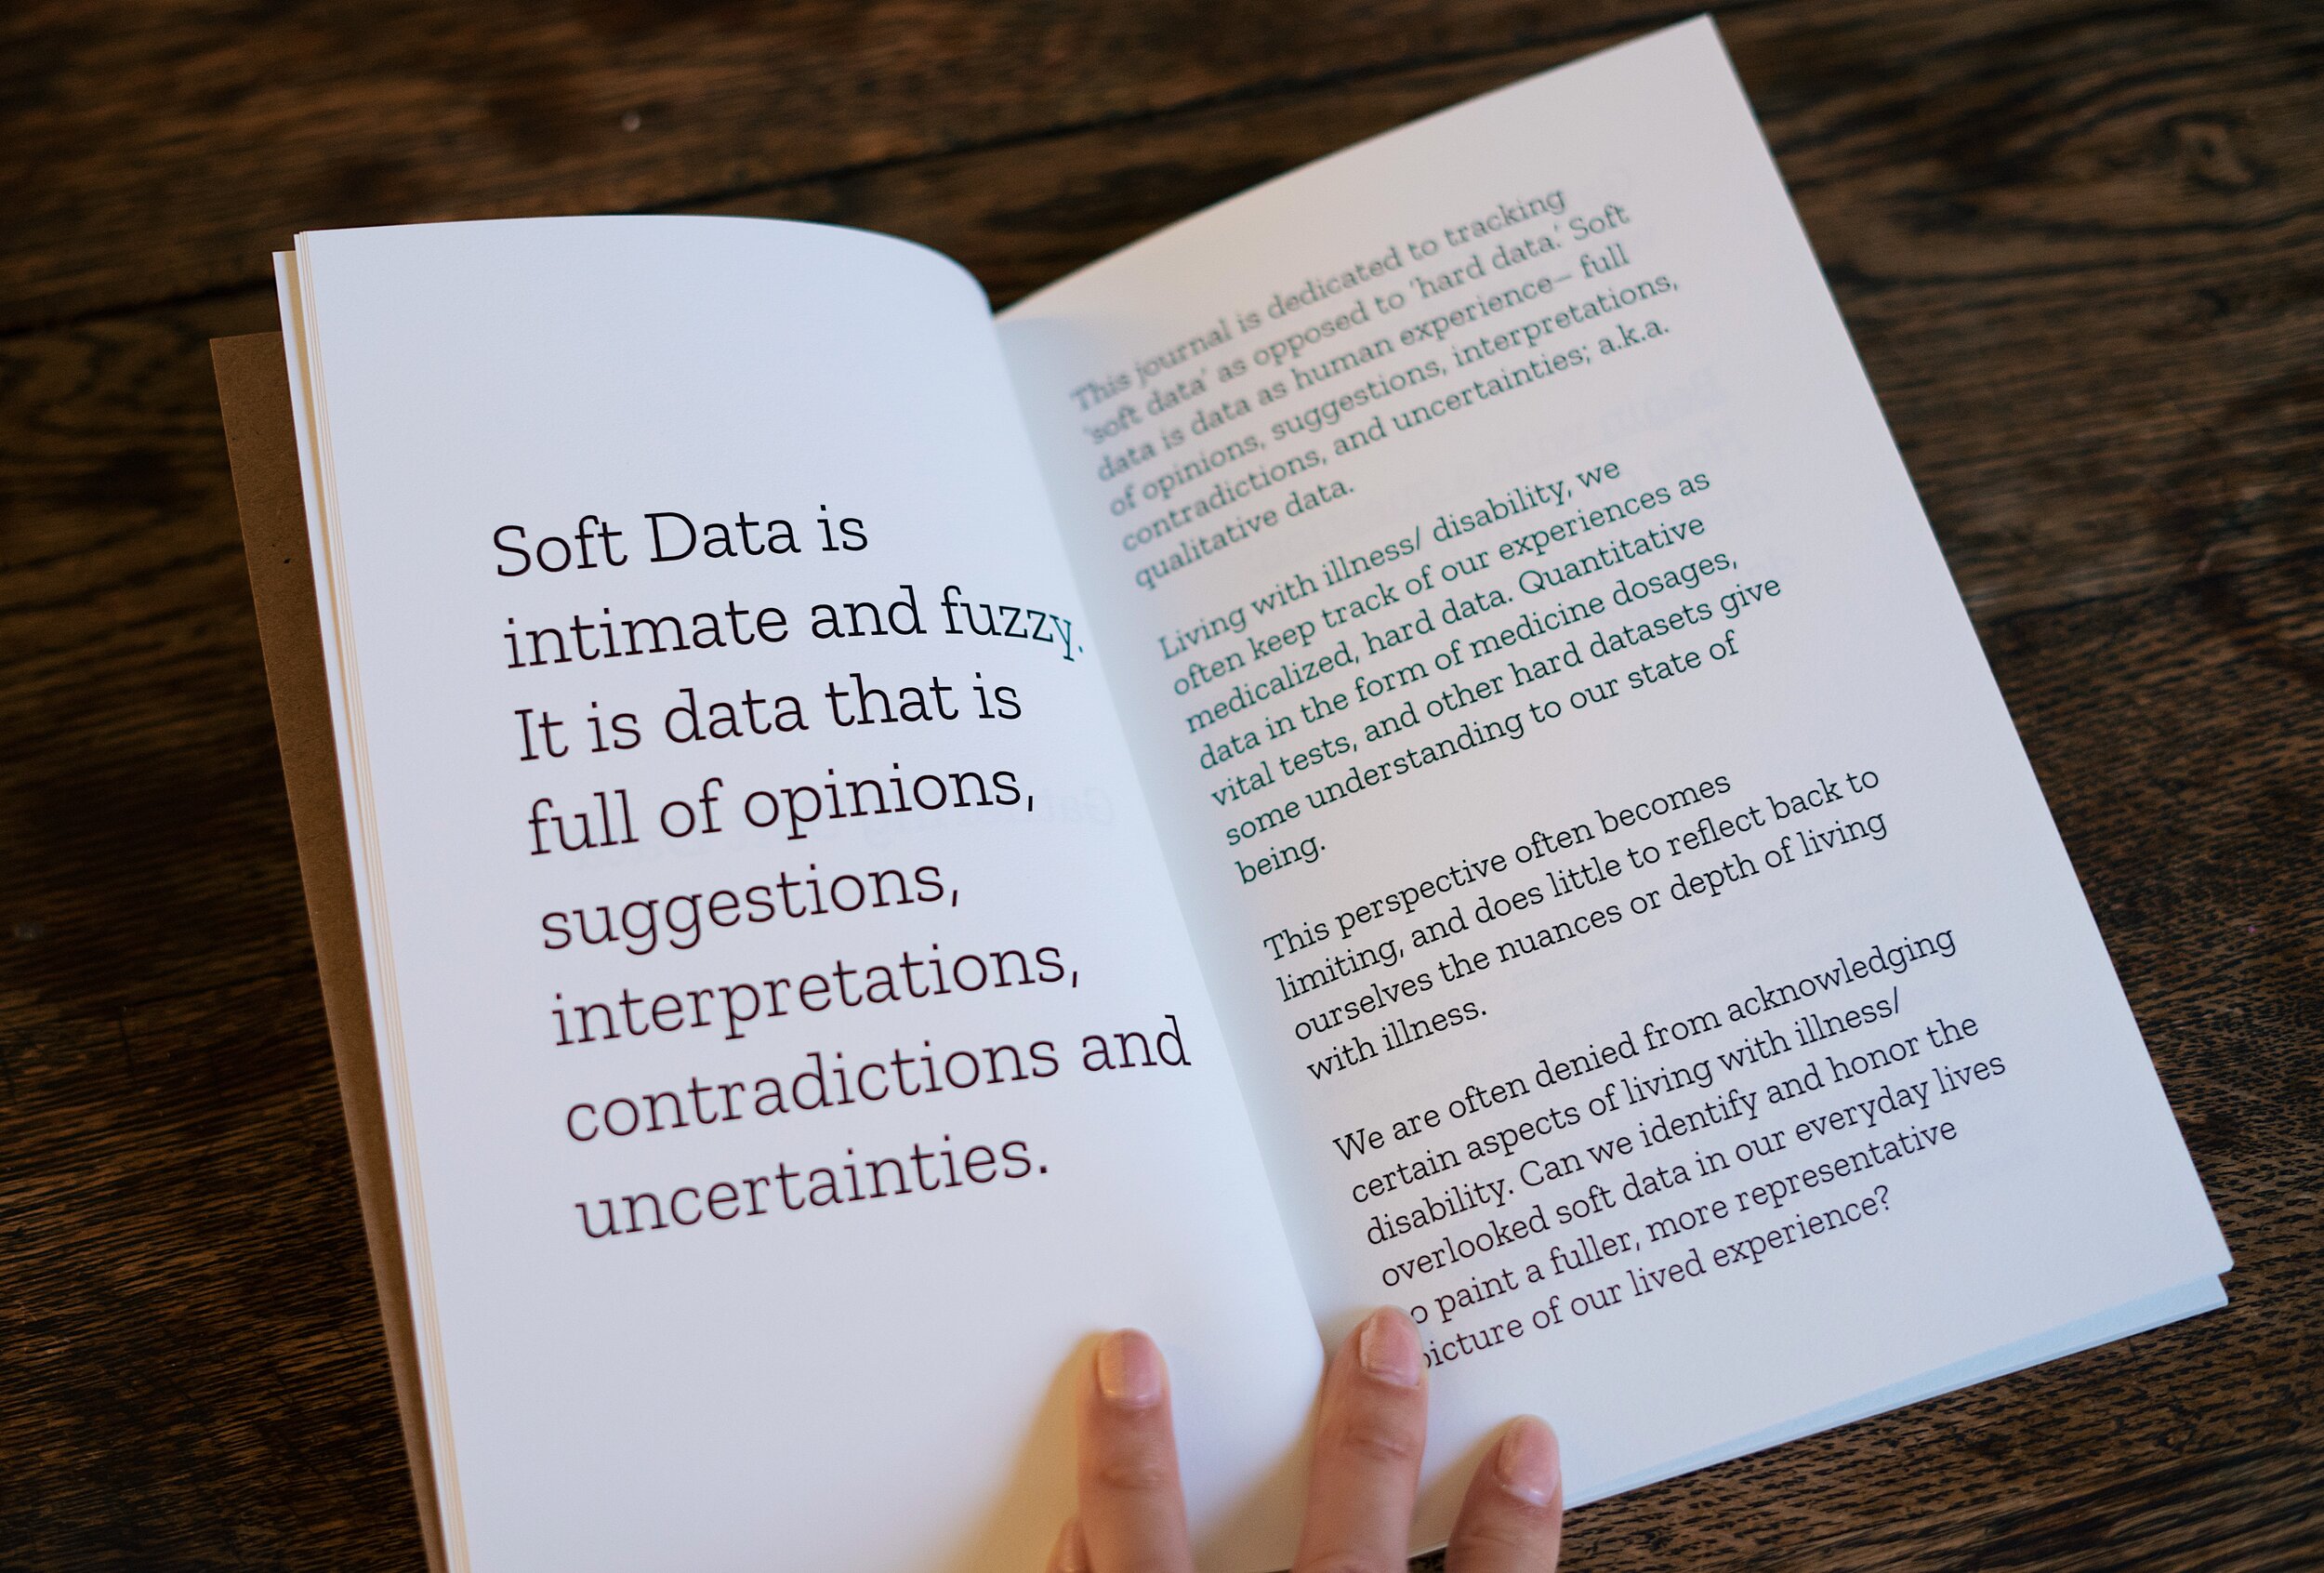  A page open that describes what ‘soft data’ is on the left, on the right more detailed description of what soft data means.  